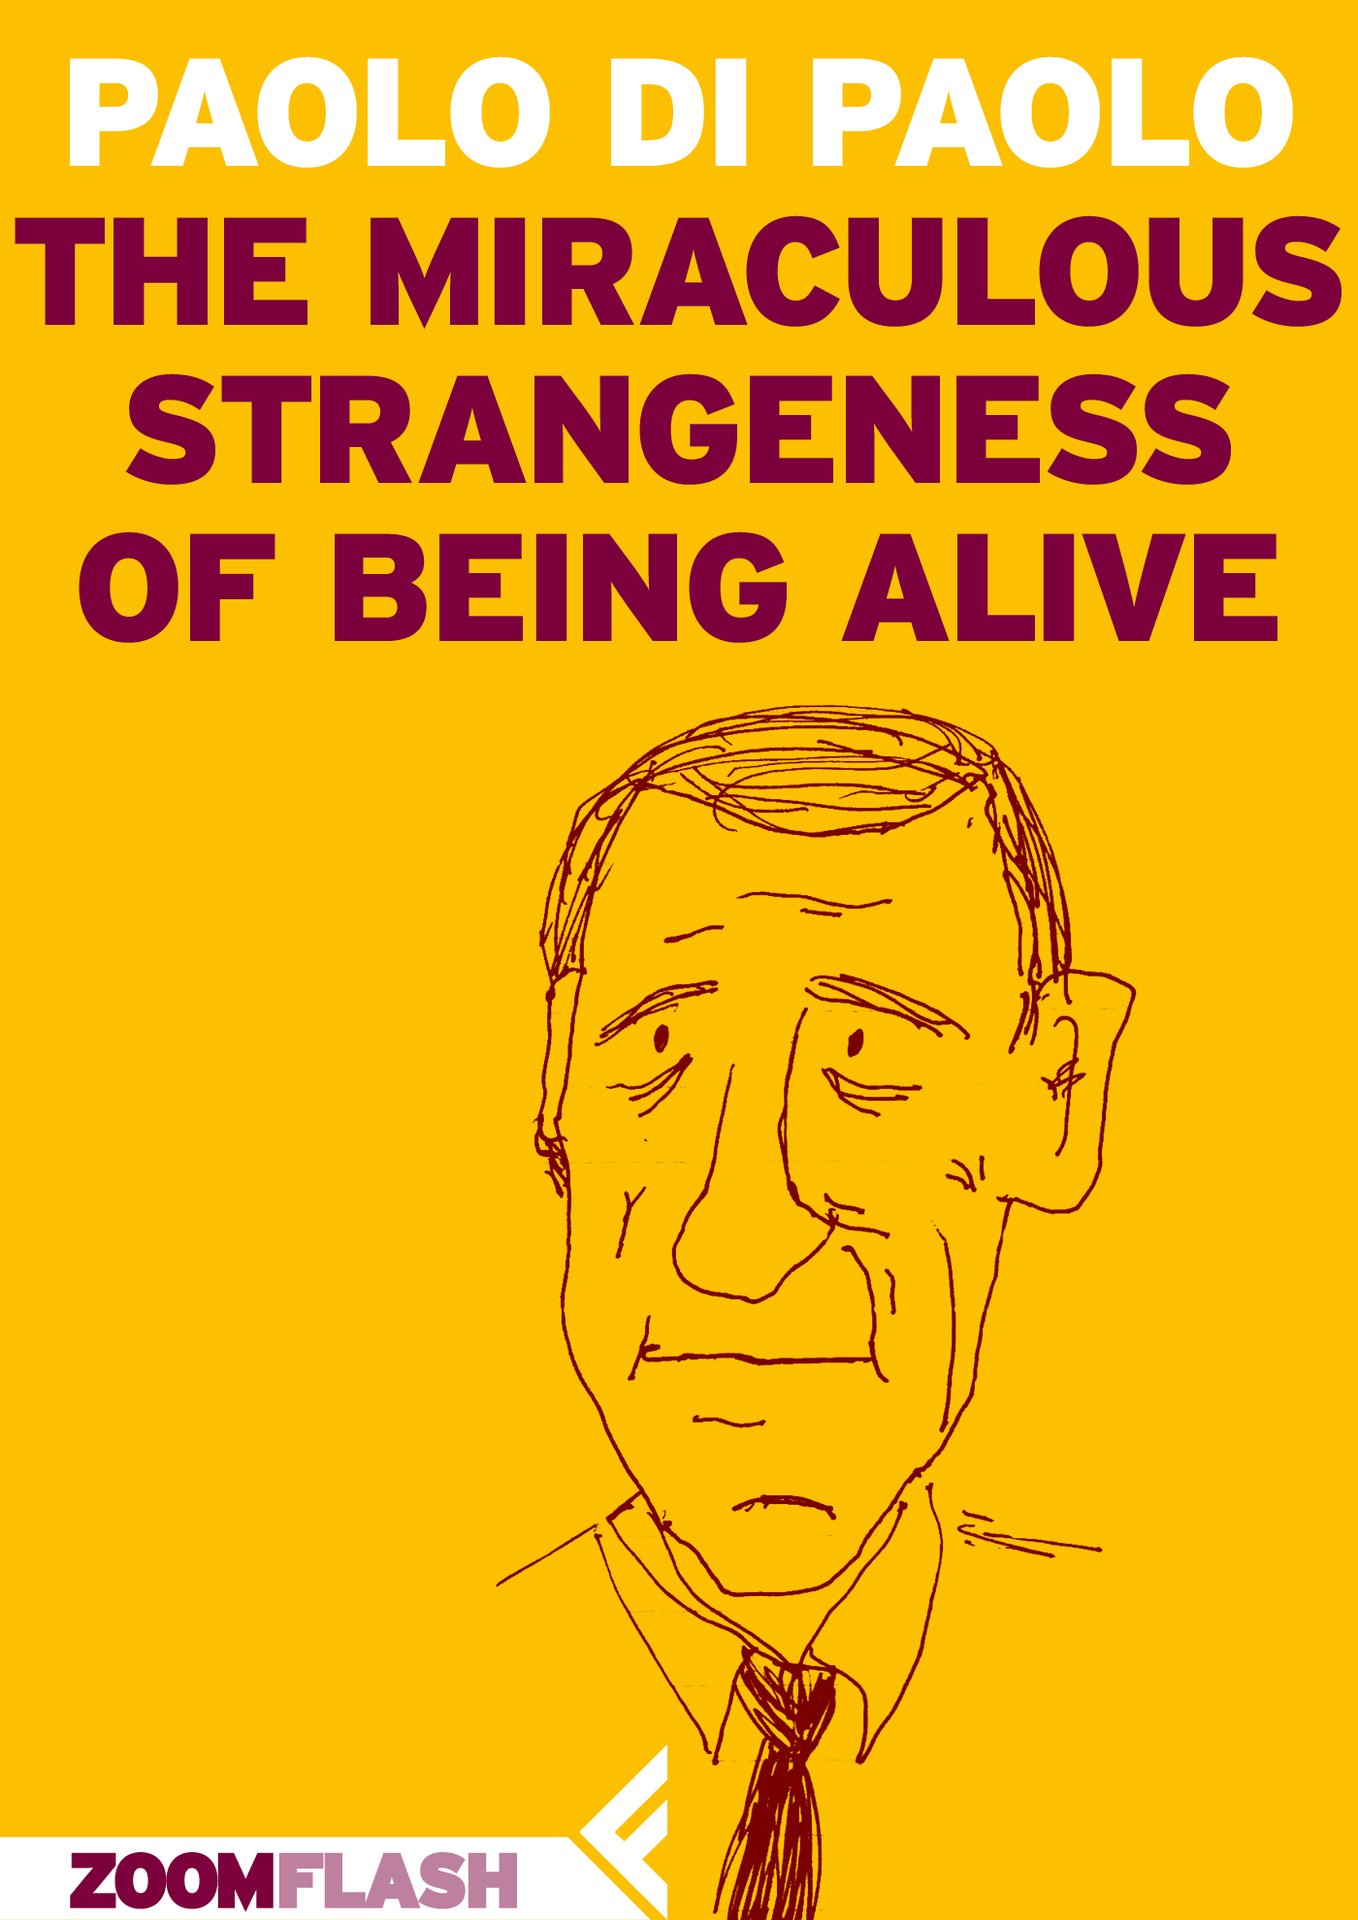 The miraculous strangeness of being alive